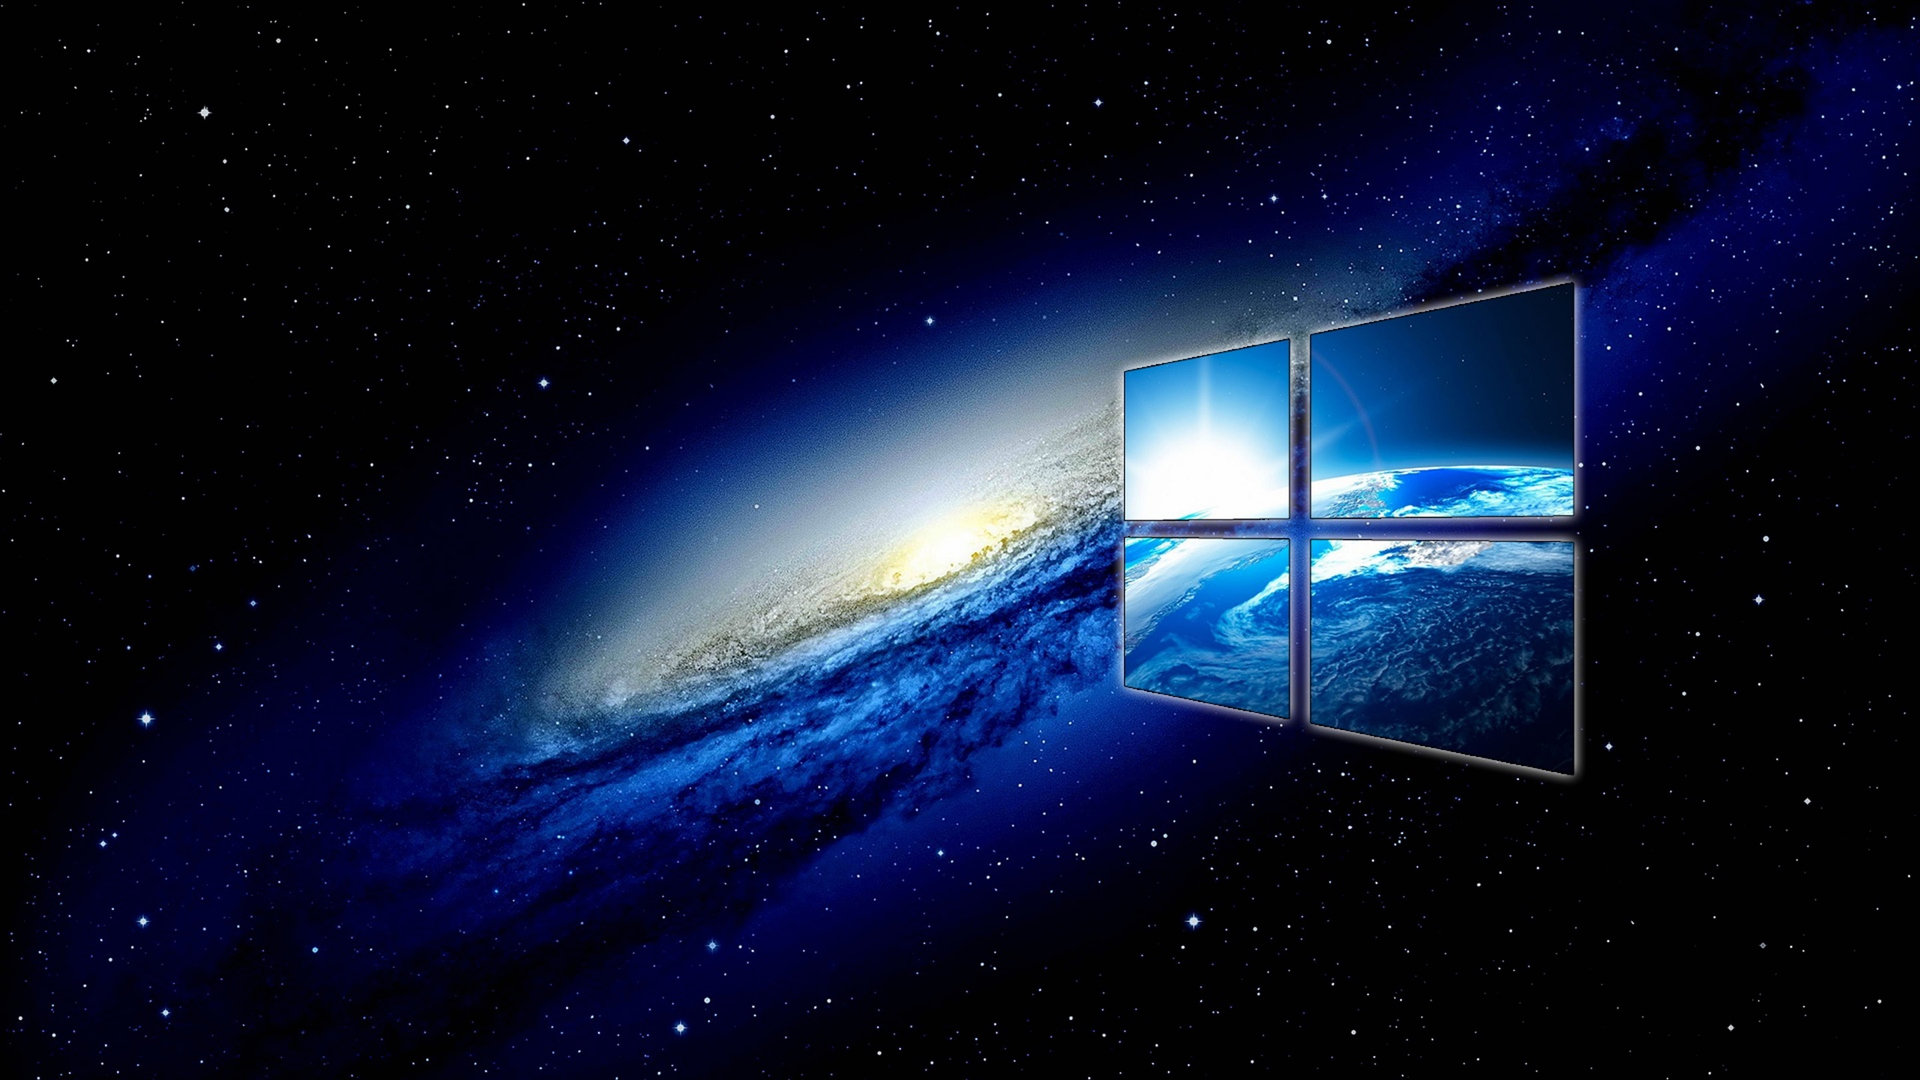 Download Windows 10, A computer, Space Wallpaper in 1920x1080 Resolution